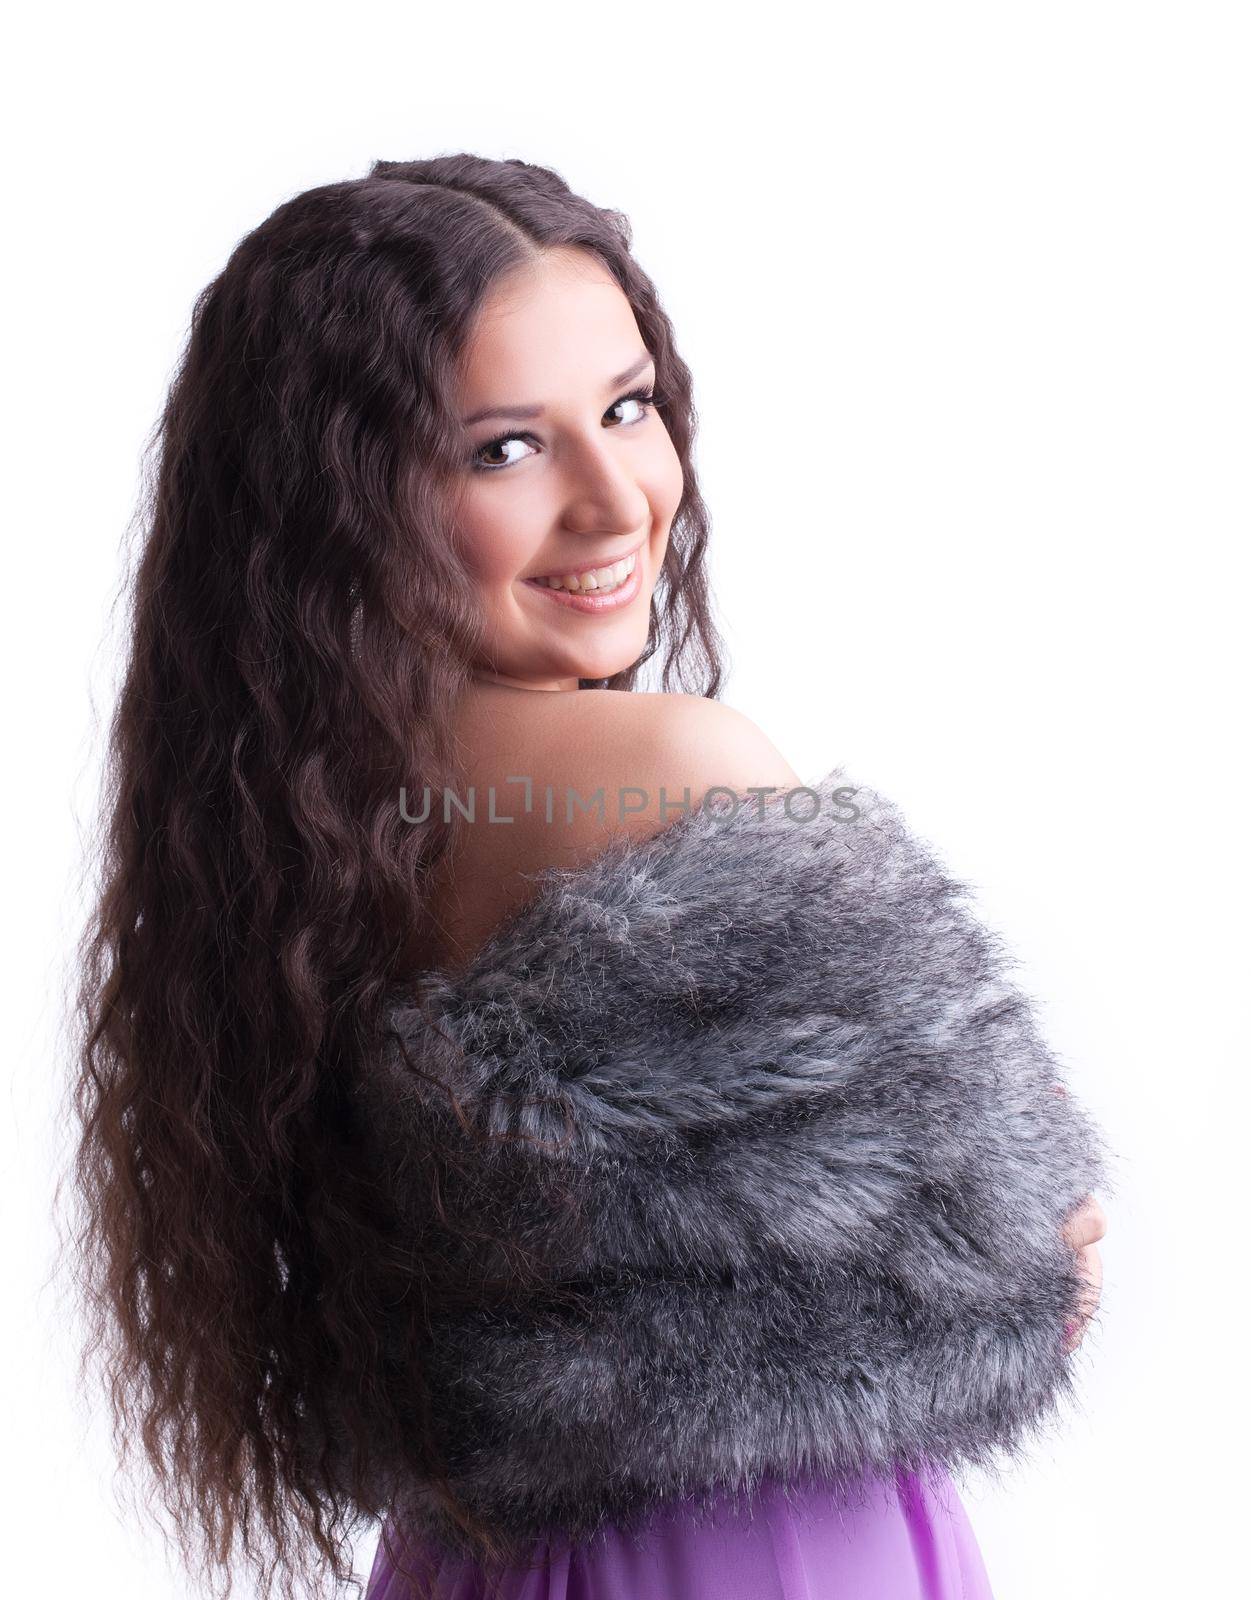 young girl with long hair in fur coat look at you